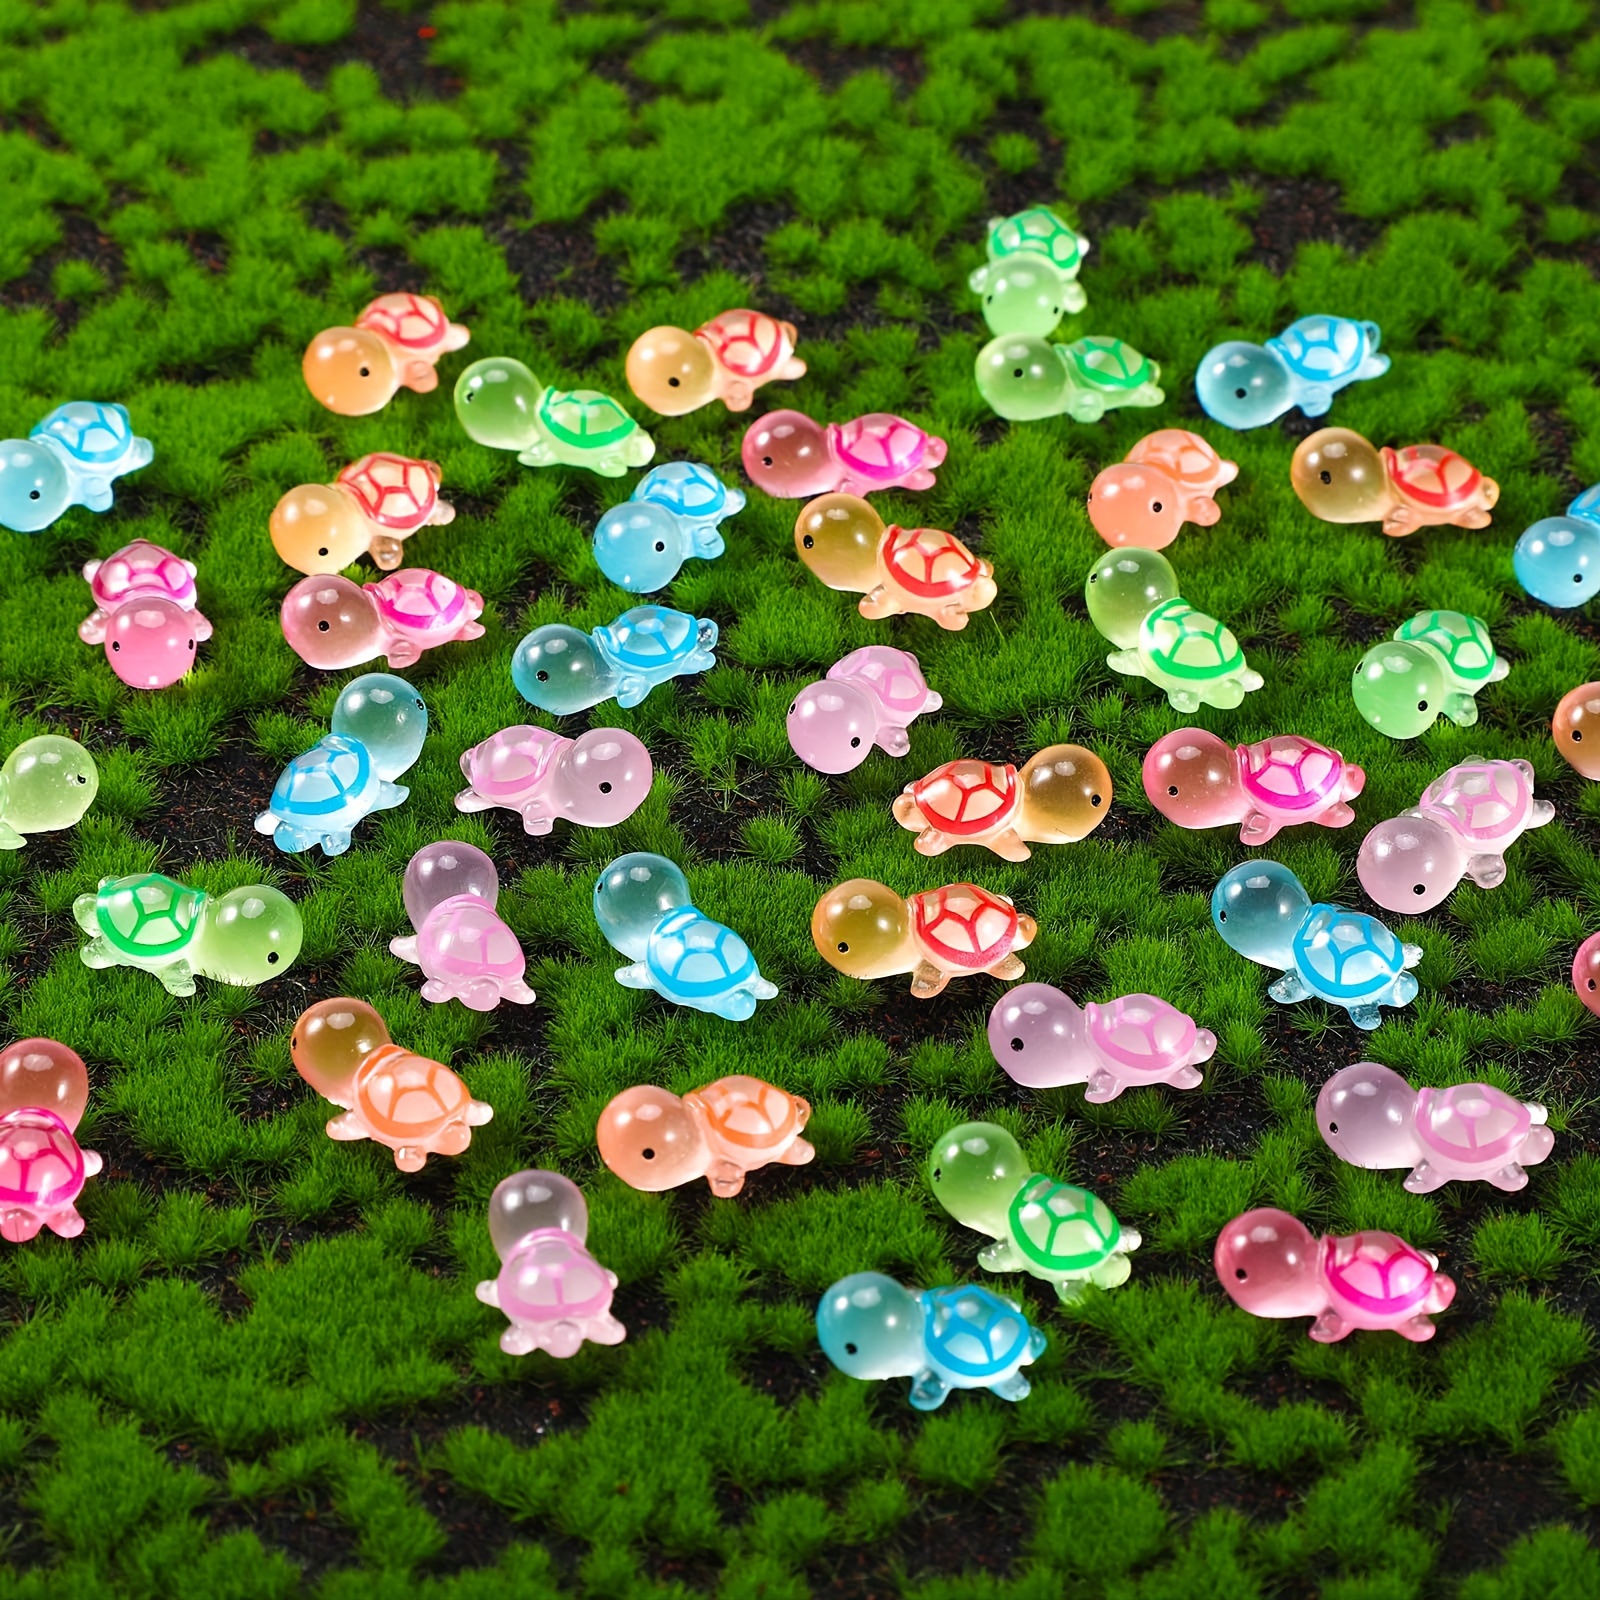 

100pcs Luminous Colorful Turtle Figurines Set, Resin Glow-in-the-dark Miniatures For Diy Crafts, Home Decor, Fairy Garden Accessories & Party Favors